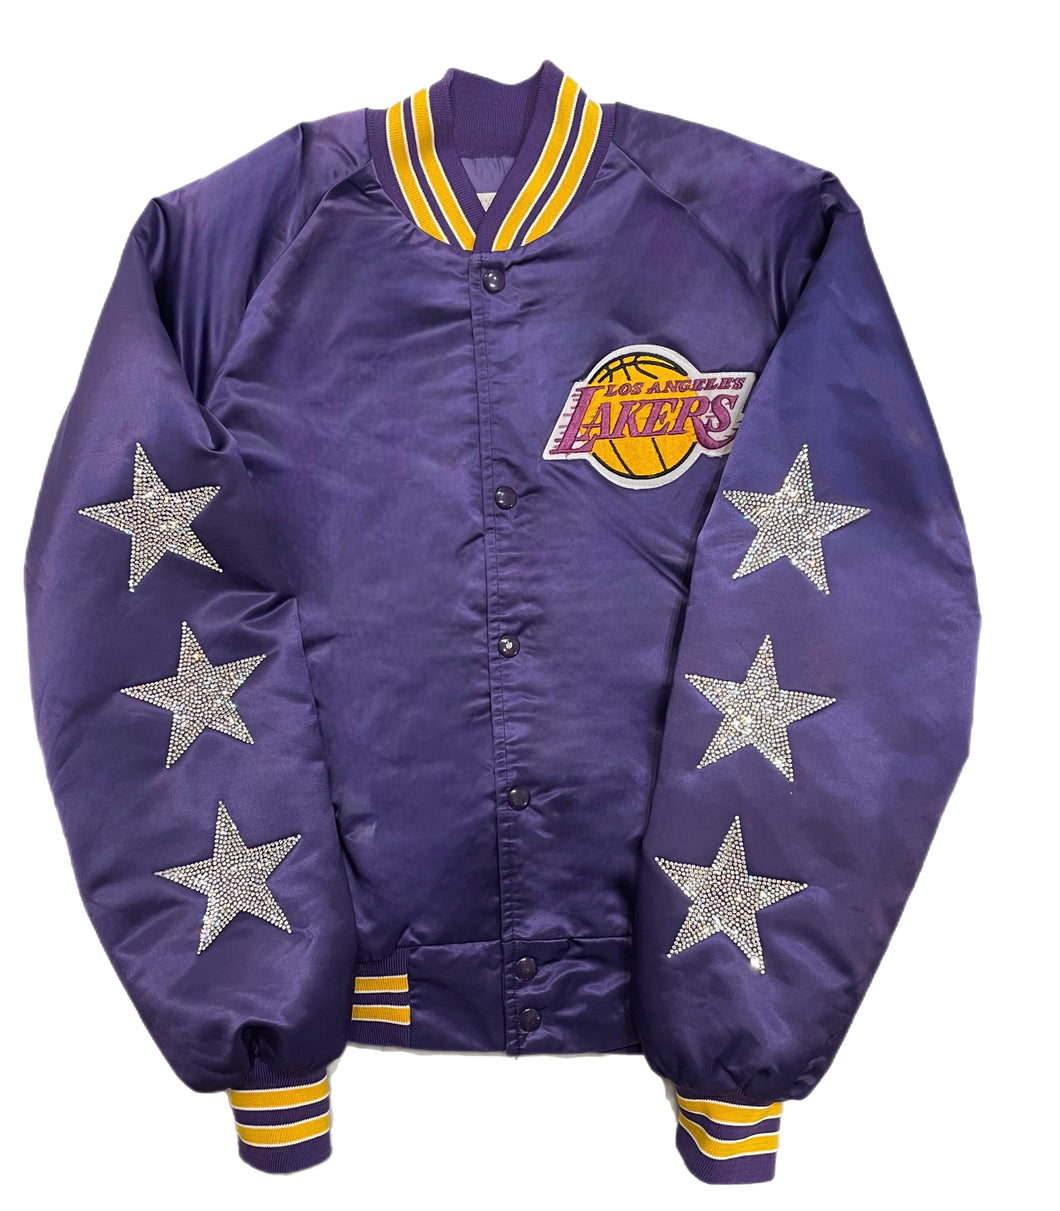 LA Lakers, NBA One of a KIND Vintage “Rare Find” Jacket with Three Crystal Star Design